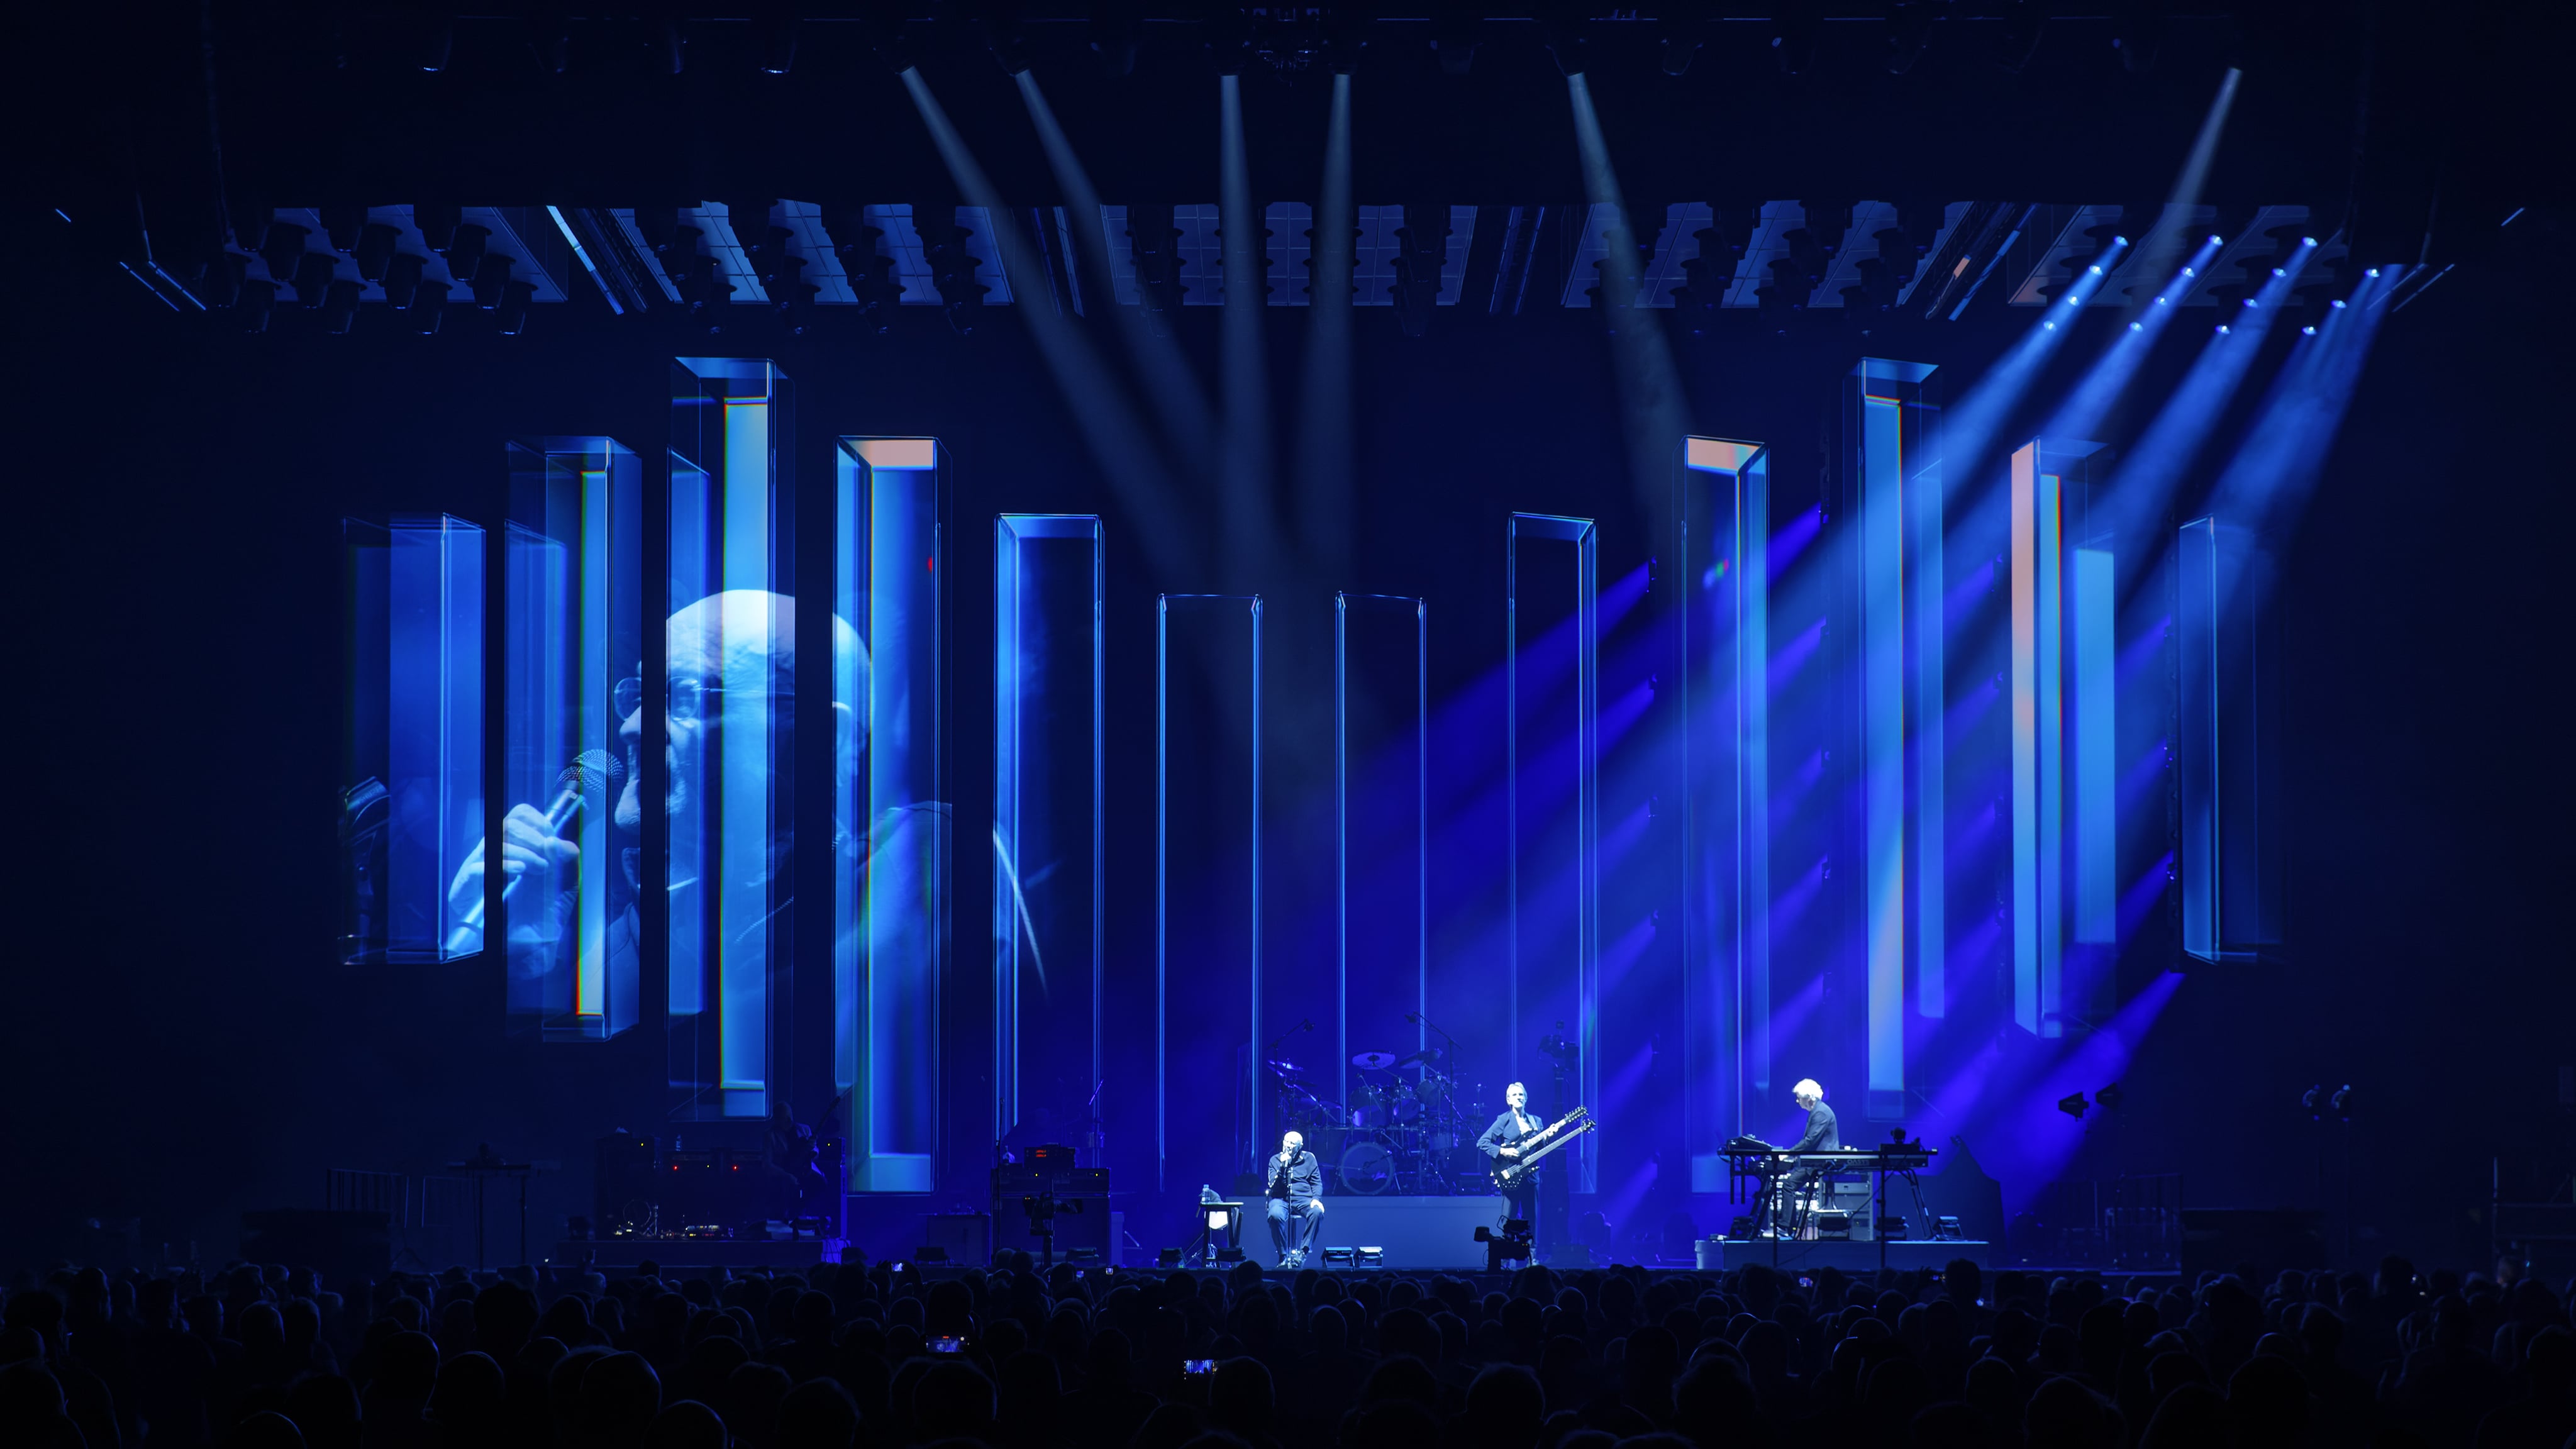 all photos taken in london / the O2-arena march 24th, 25th, 26th, during the last three concerts of the tour of
genesis :: the last domino?
with tony banks, phil collins &amp; mike rutherford
drums: nic collins
guitars: daryl stuermer
backgroundSingers: daniel pearce &amp; patrick smyth